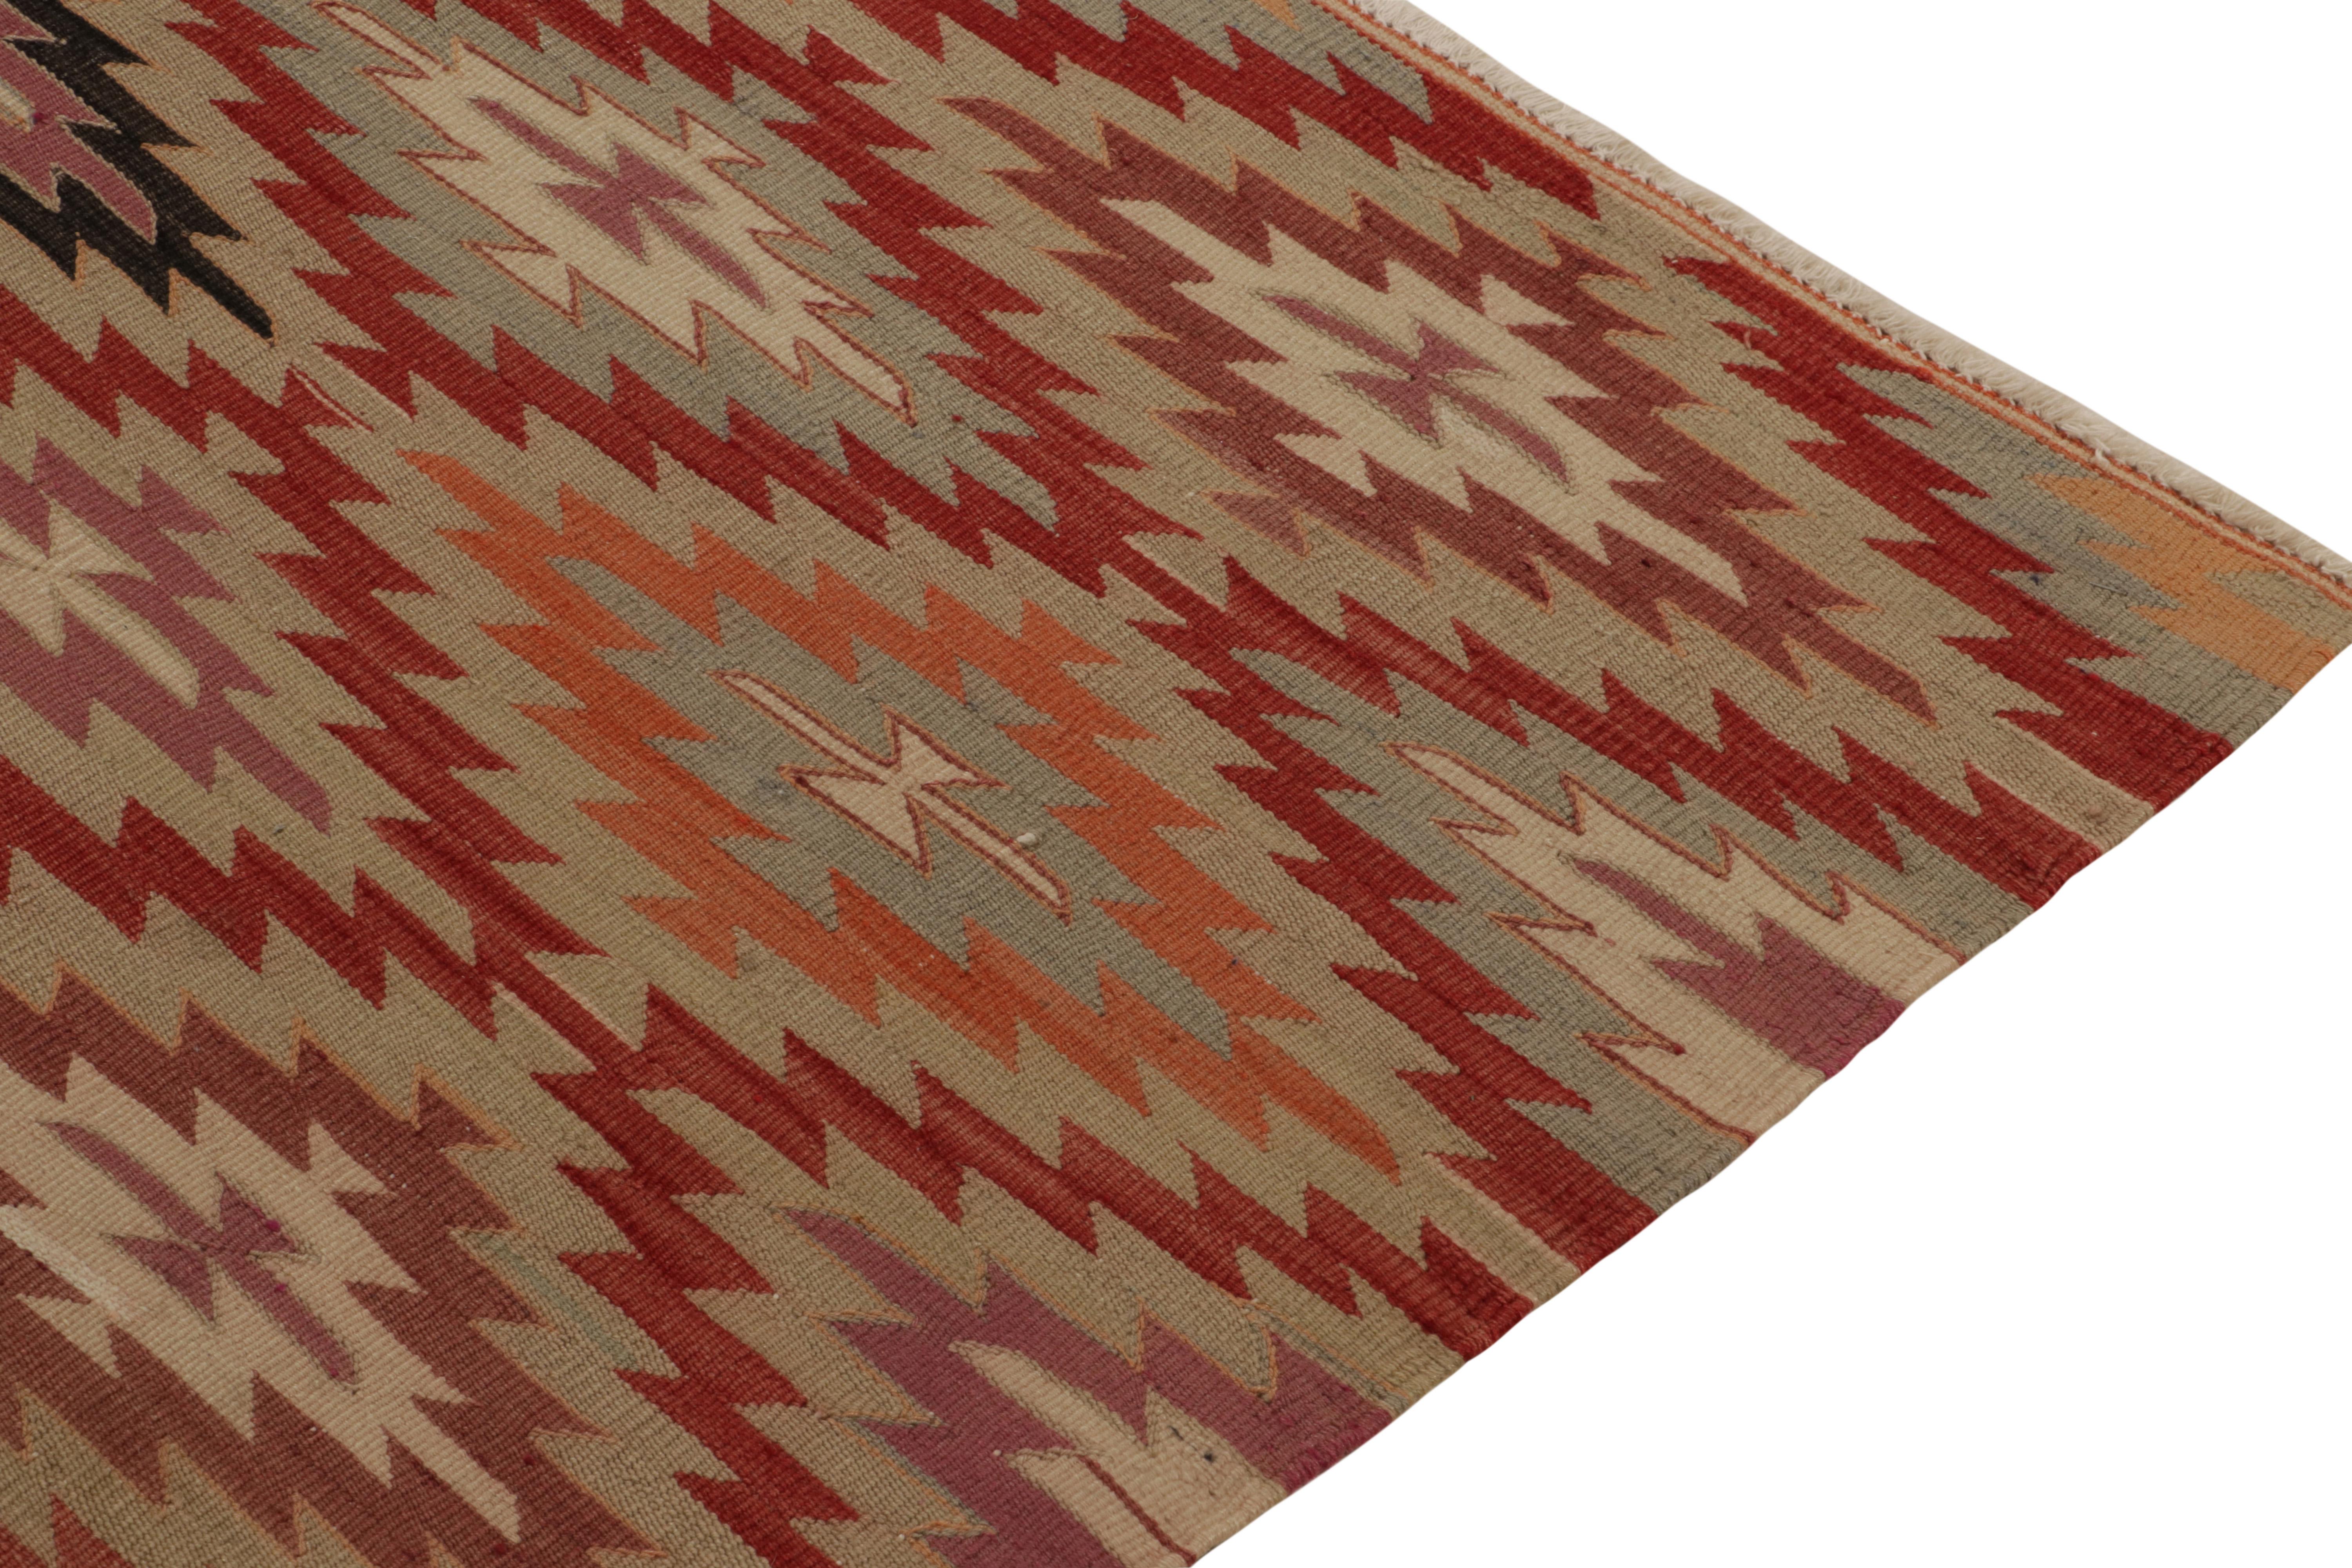 Vintage Tribal Kilim rug in Red, Orange and Blue Geometric patterns In Good Condition For Sale In Long Island City, NY